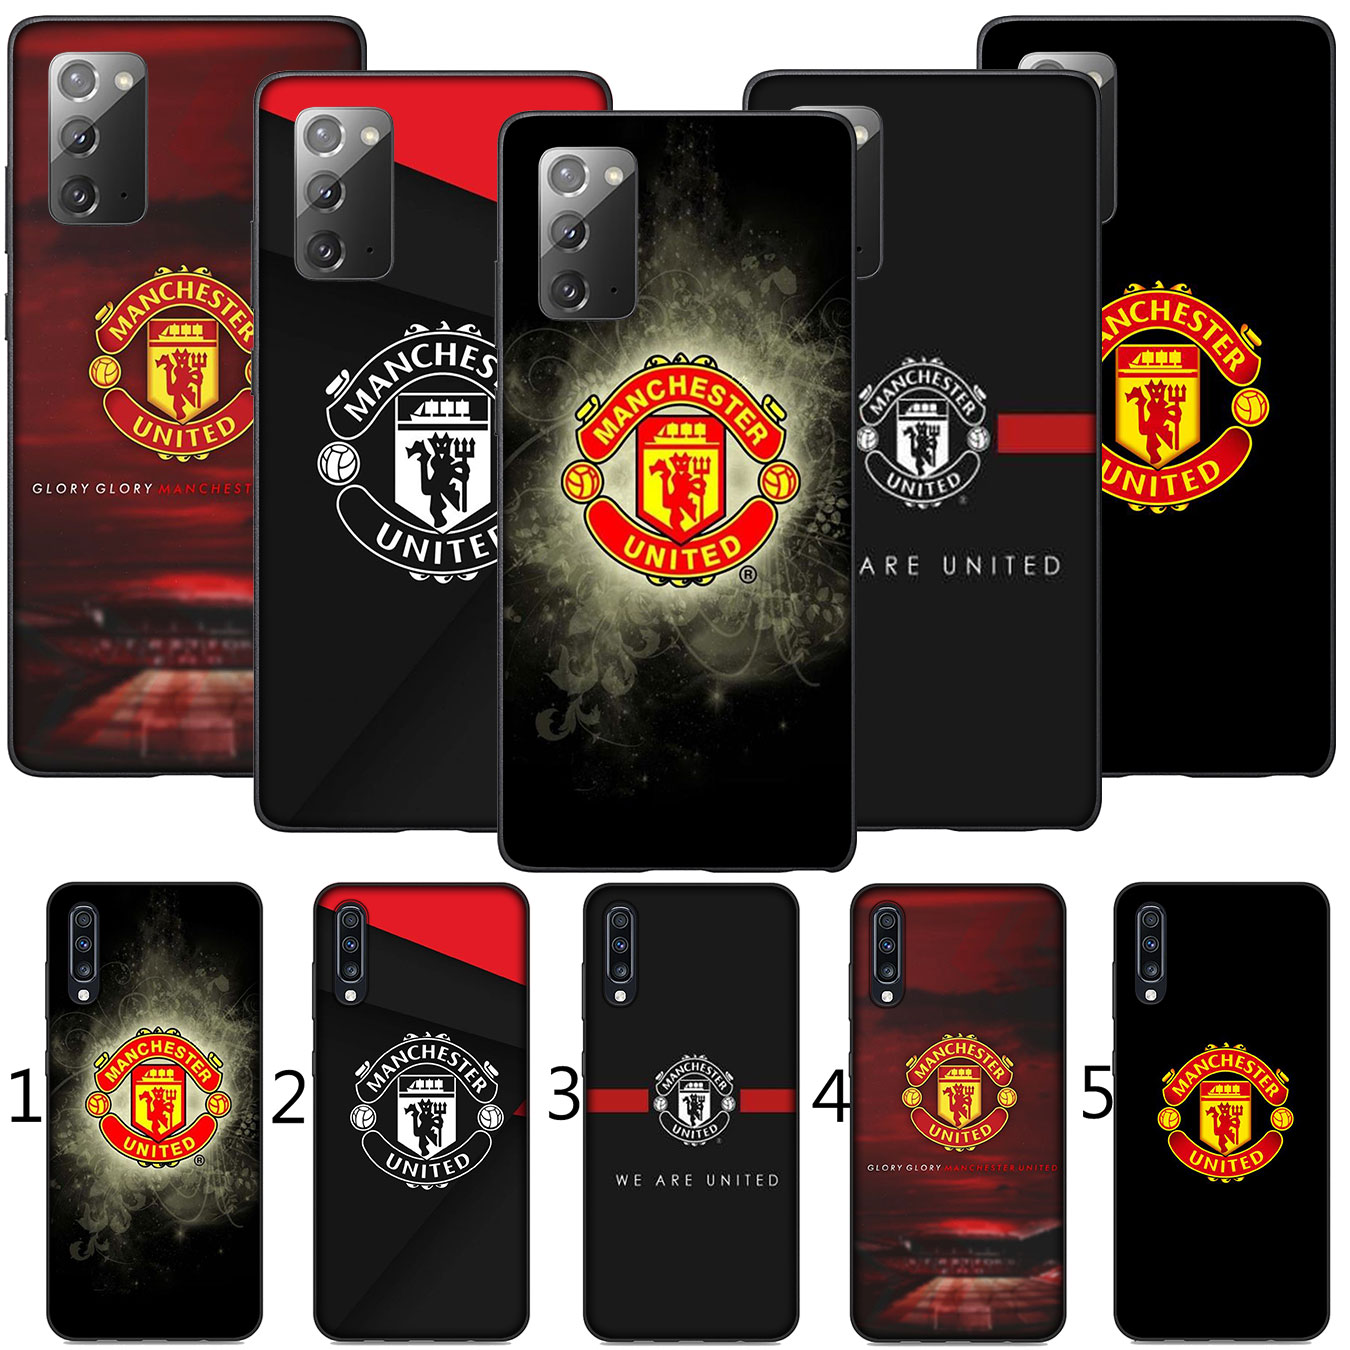 Ốp điện thoại silicon họa tiết Manchester United cho iPhone XR X XS Max 7 8 6 6s Plus + 6Plus 7Plus 8Plus